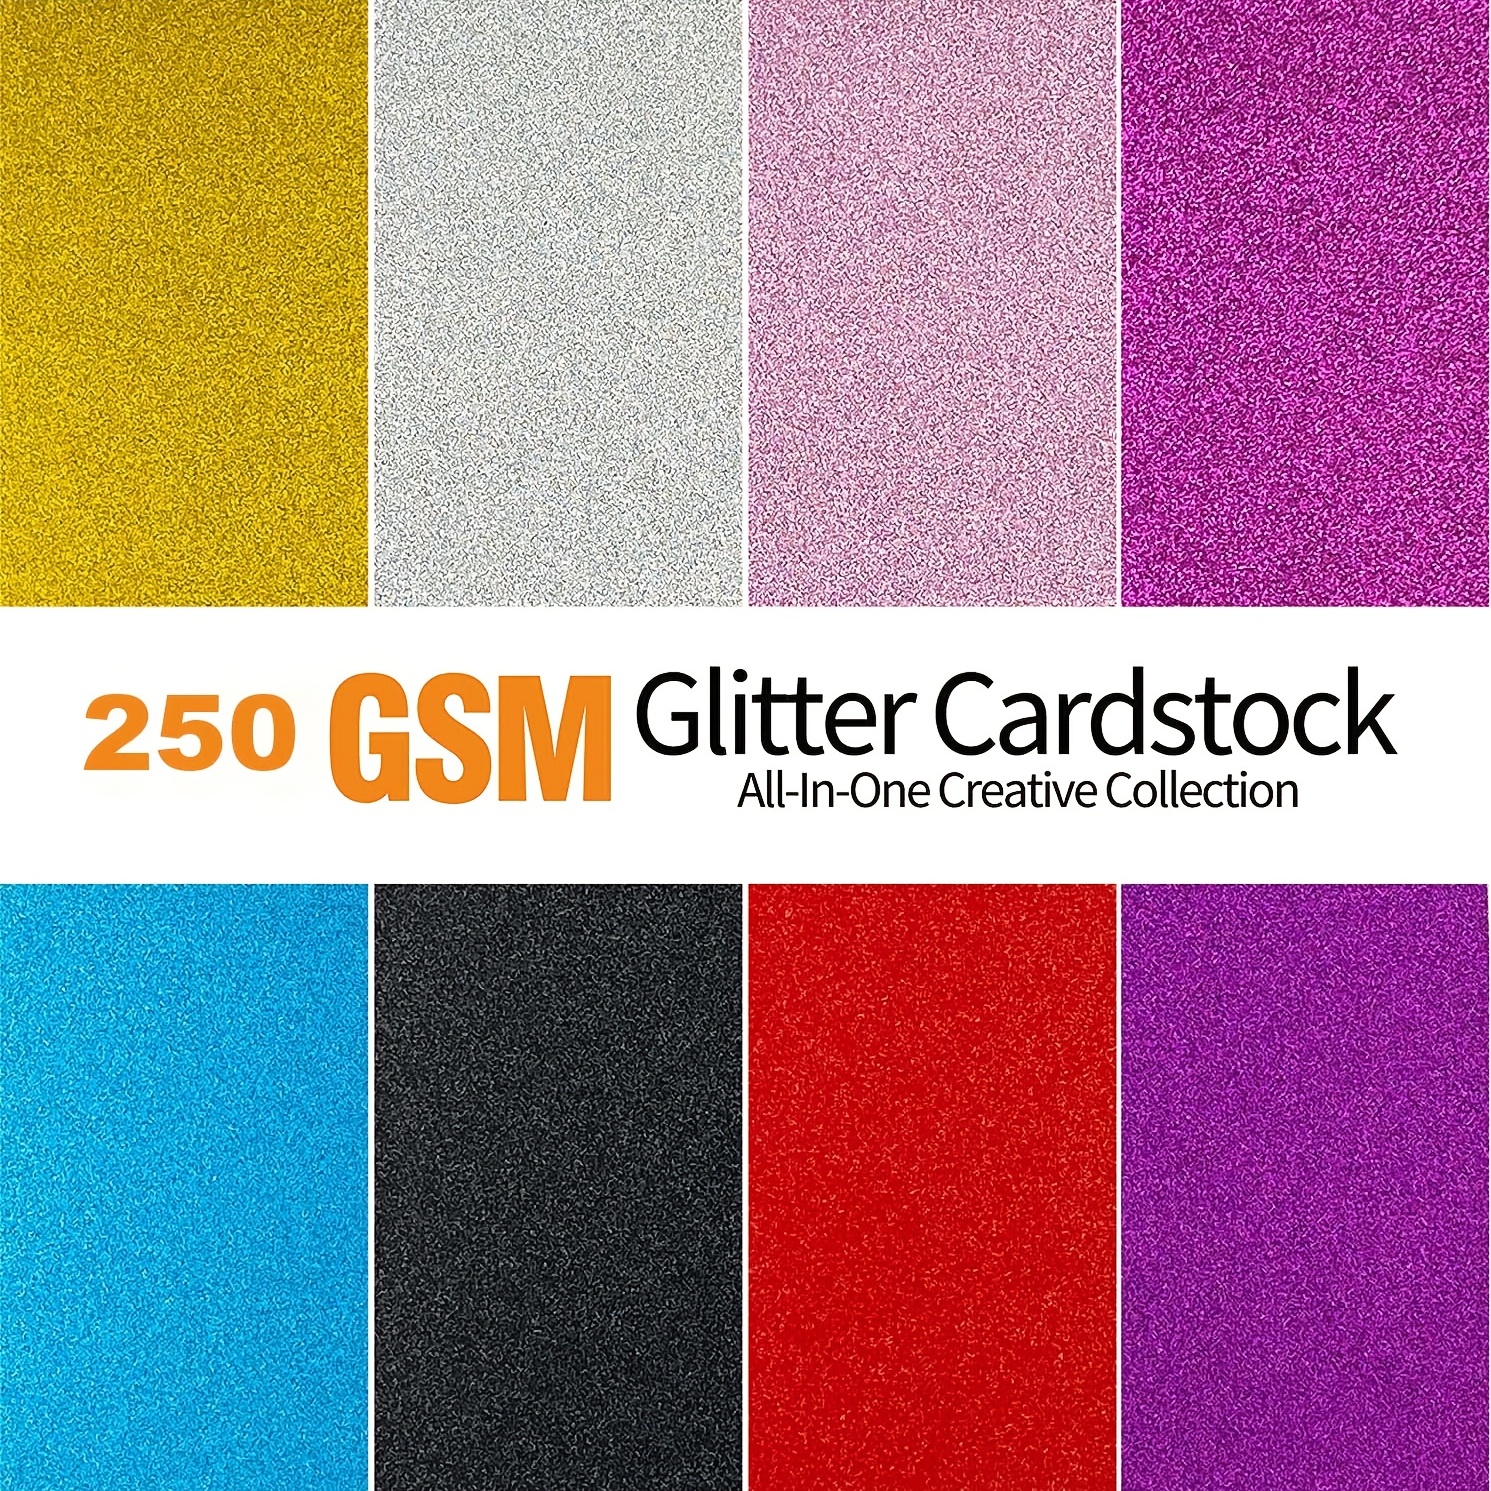 60 Pack Metallic Paper Sheets Color Foil Mirror Cardstock Shimmering Paper 250gsm/92lb for Decorative, Weddings & Birthdays Invitations, Cardmaking